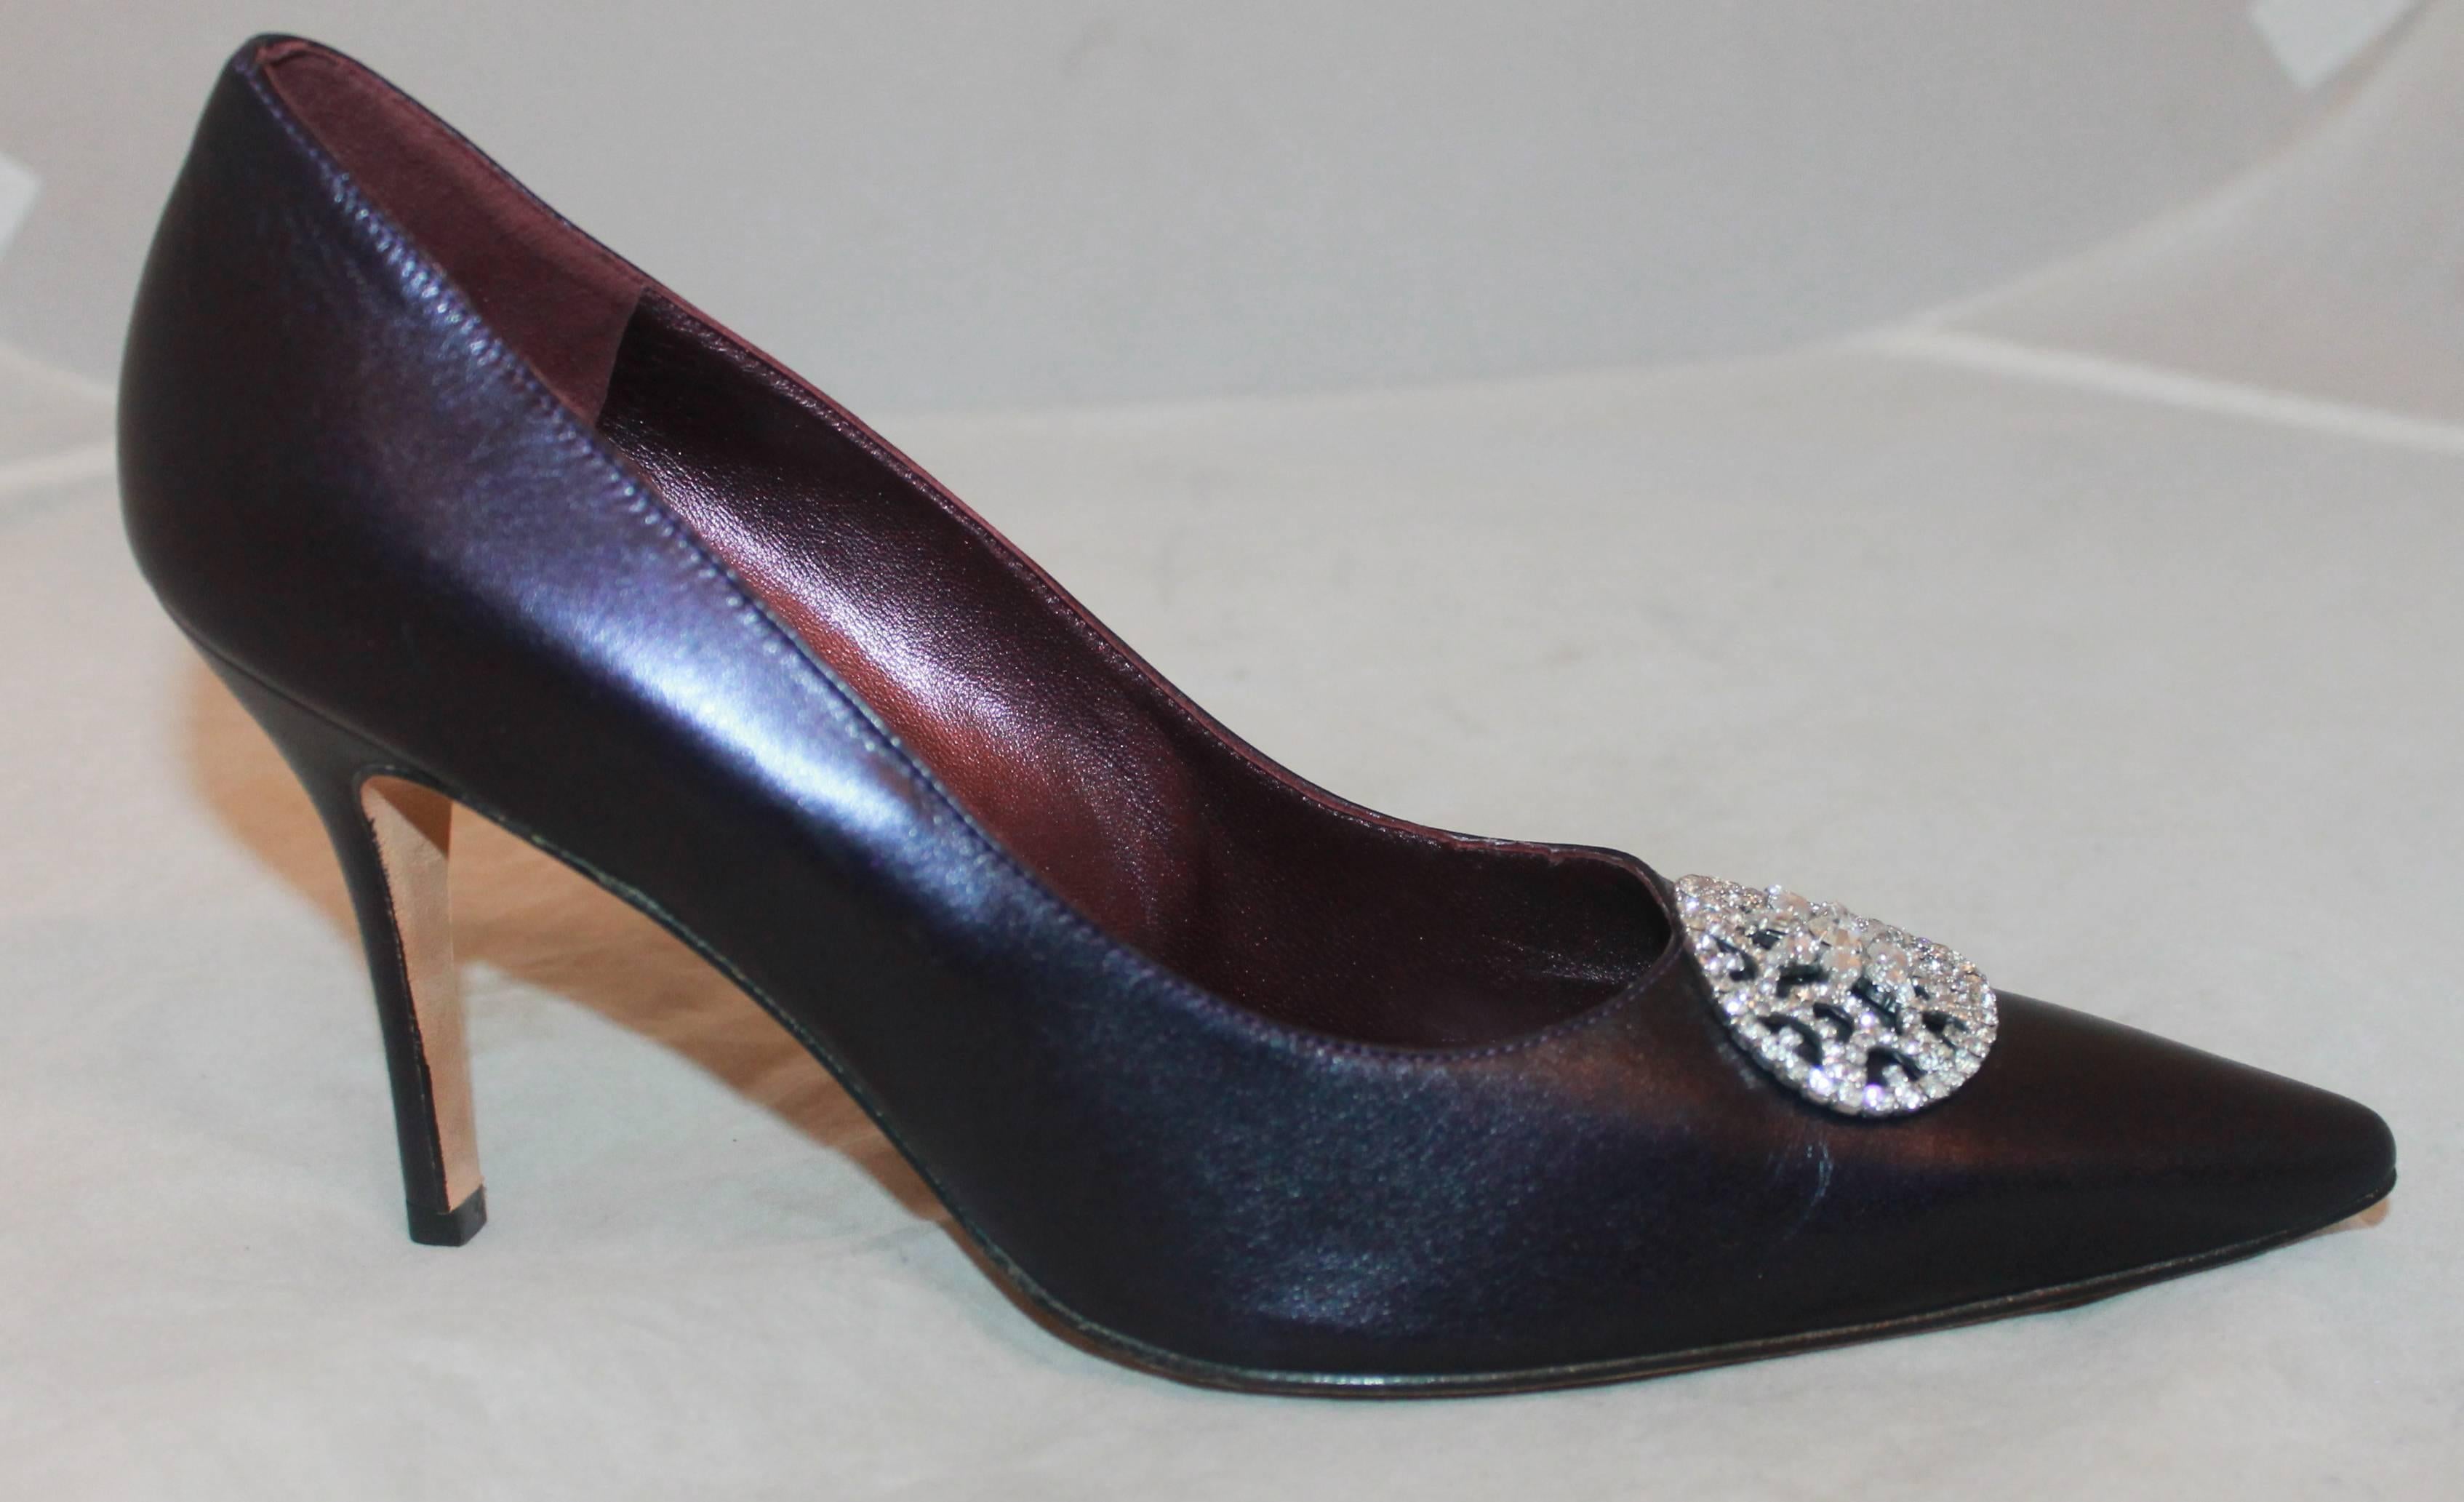 Manolo Blahnik Metallic Eggplant Leather Pumps w/ Rhinestone Pendant - 40.5 - New.  These lovely Blahnik pumps are in new condition having never been worn.  They feature a unique metallic eggplant leather, a rhinestone emblem, and a pointed